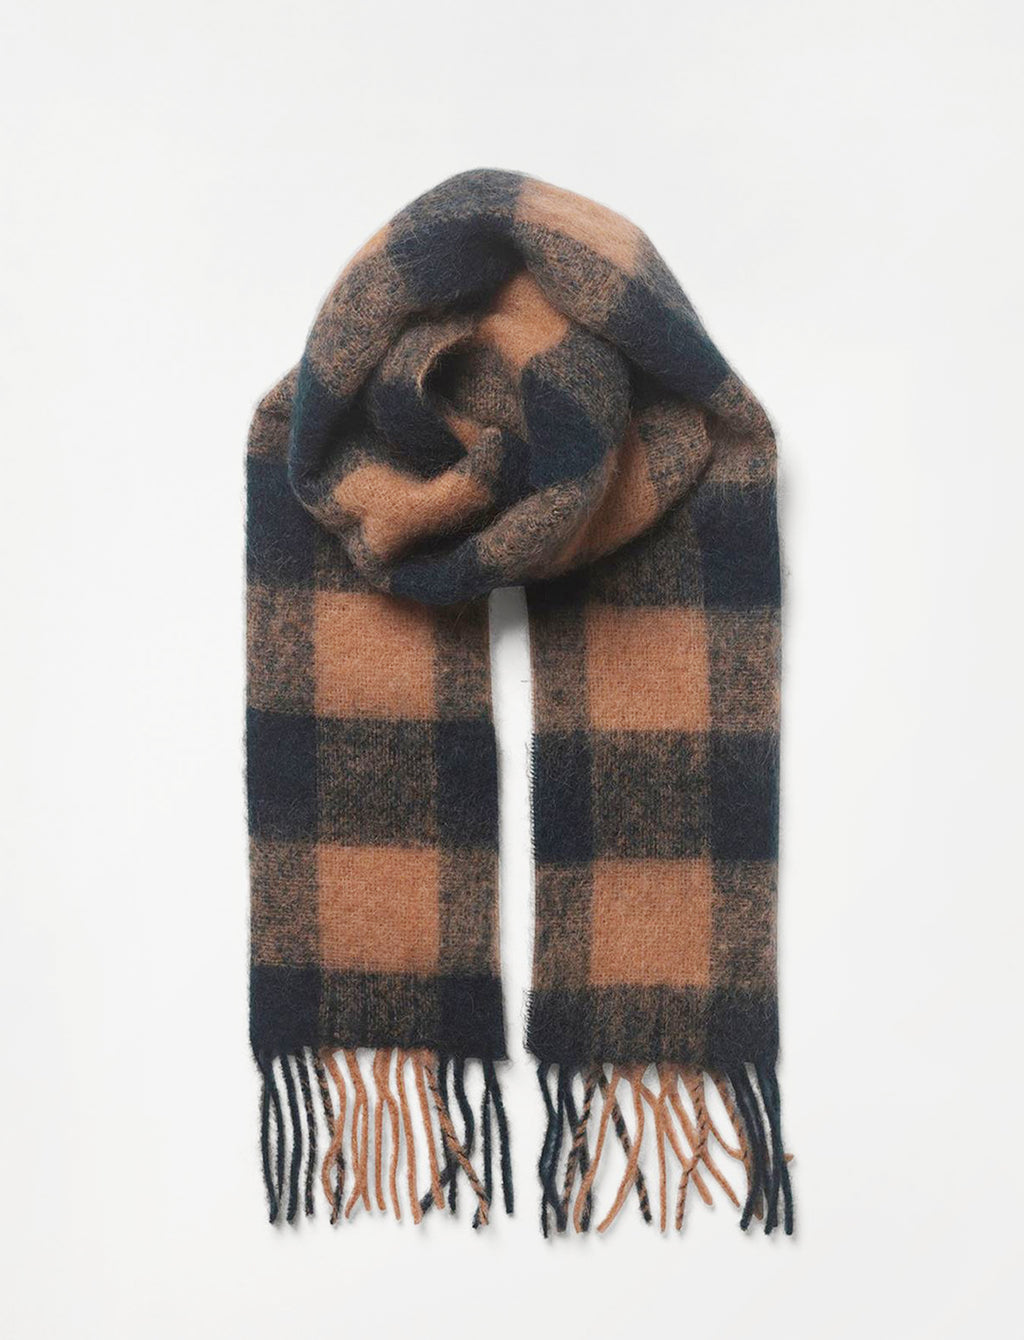 3: A cozy scarf in green and brown check print.